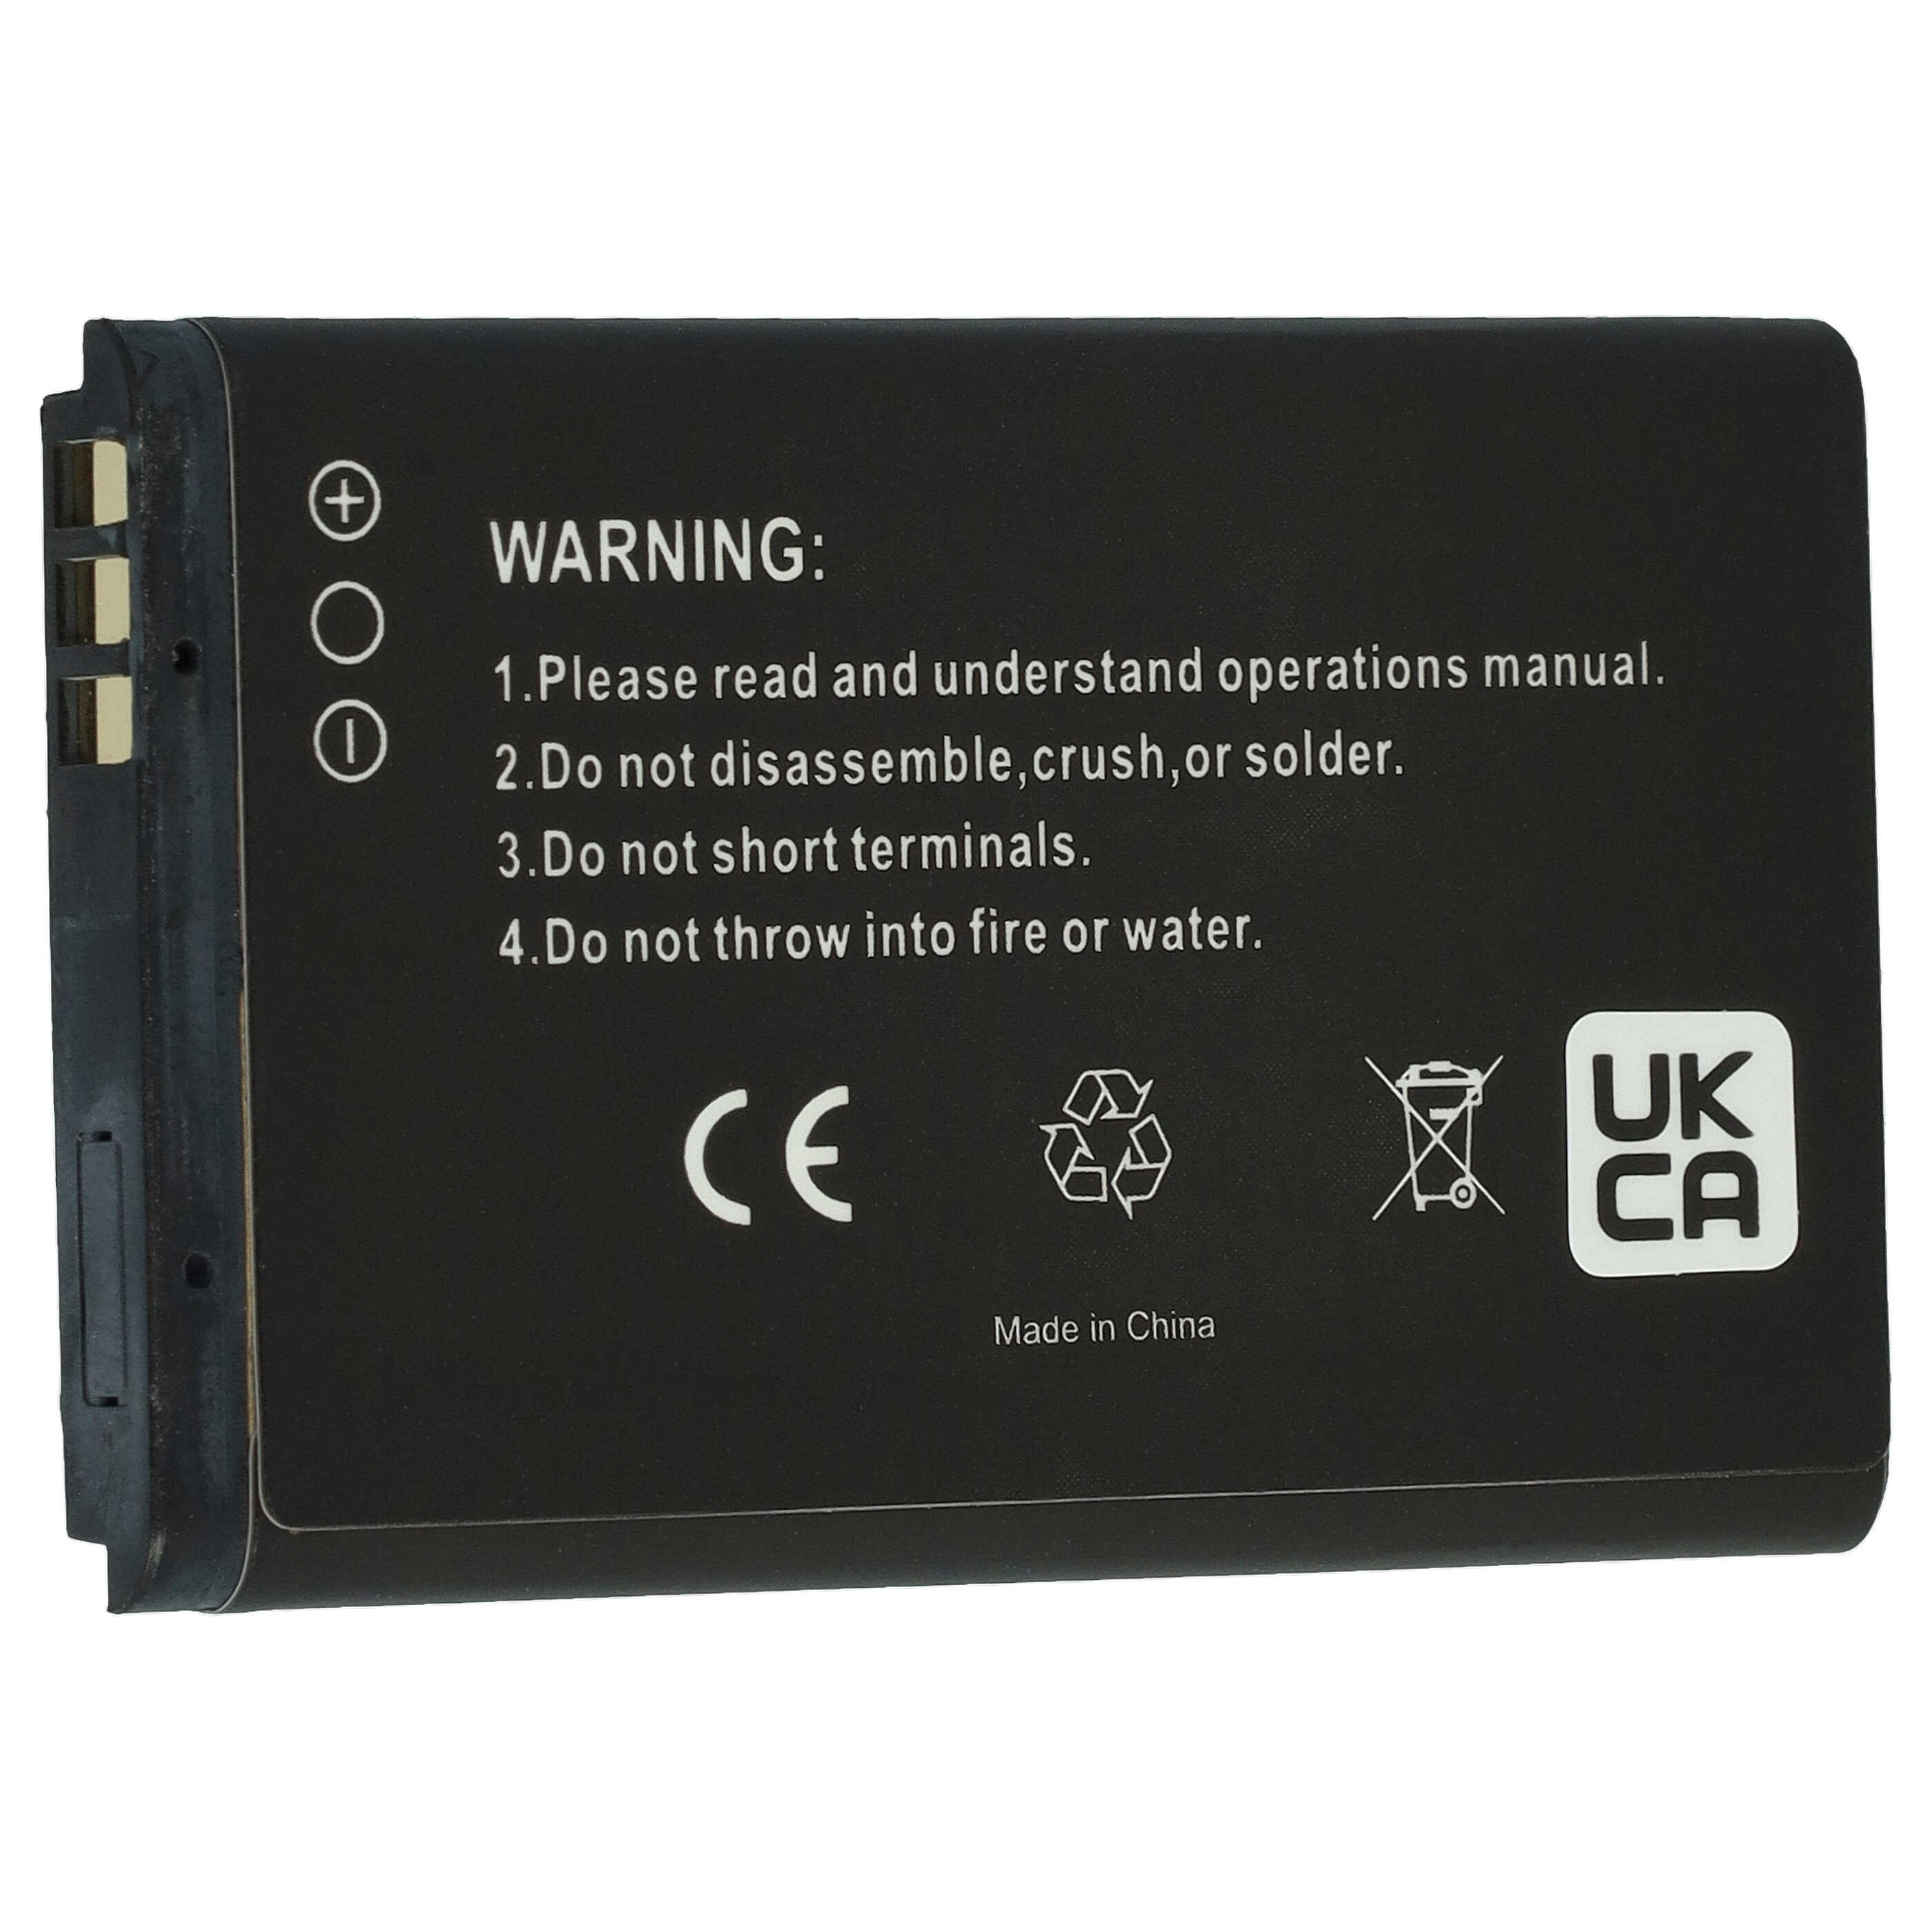 Mobile Phone Battery Replacement for Swissvoice 20405928 - 700mAh 3.7V Li-Ion